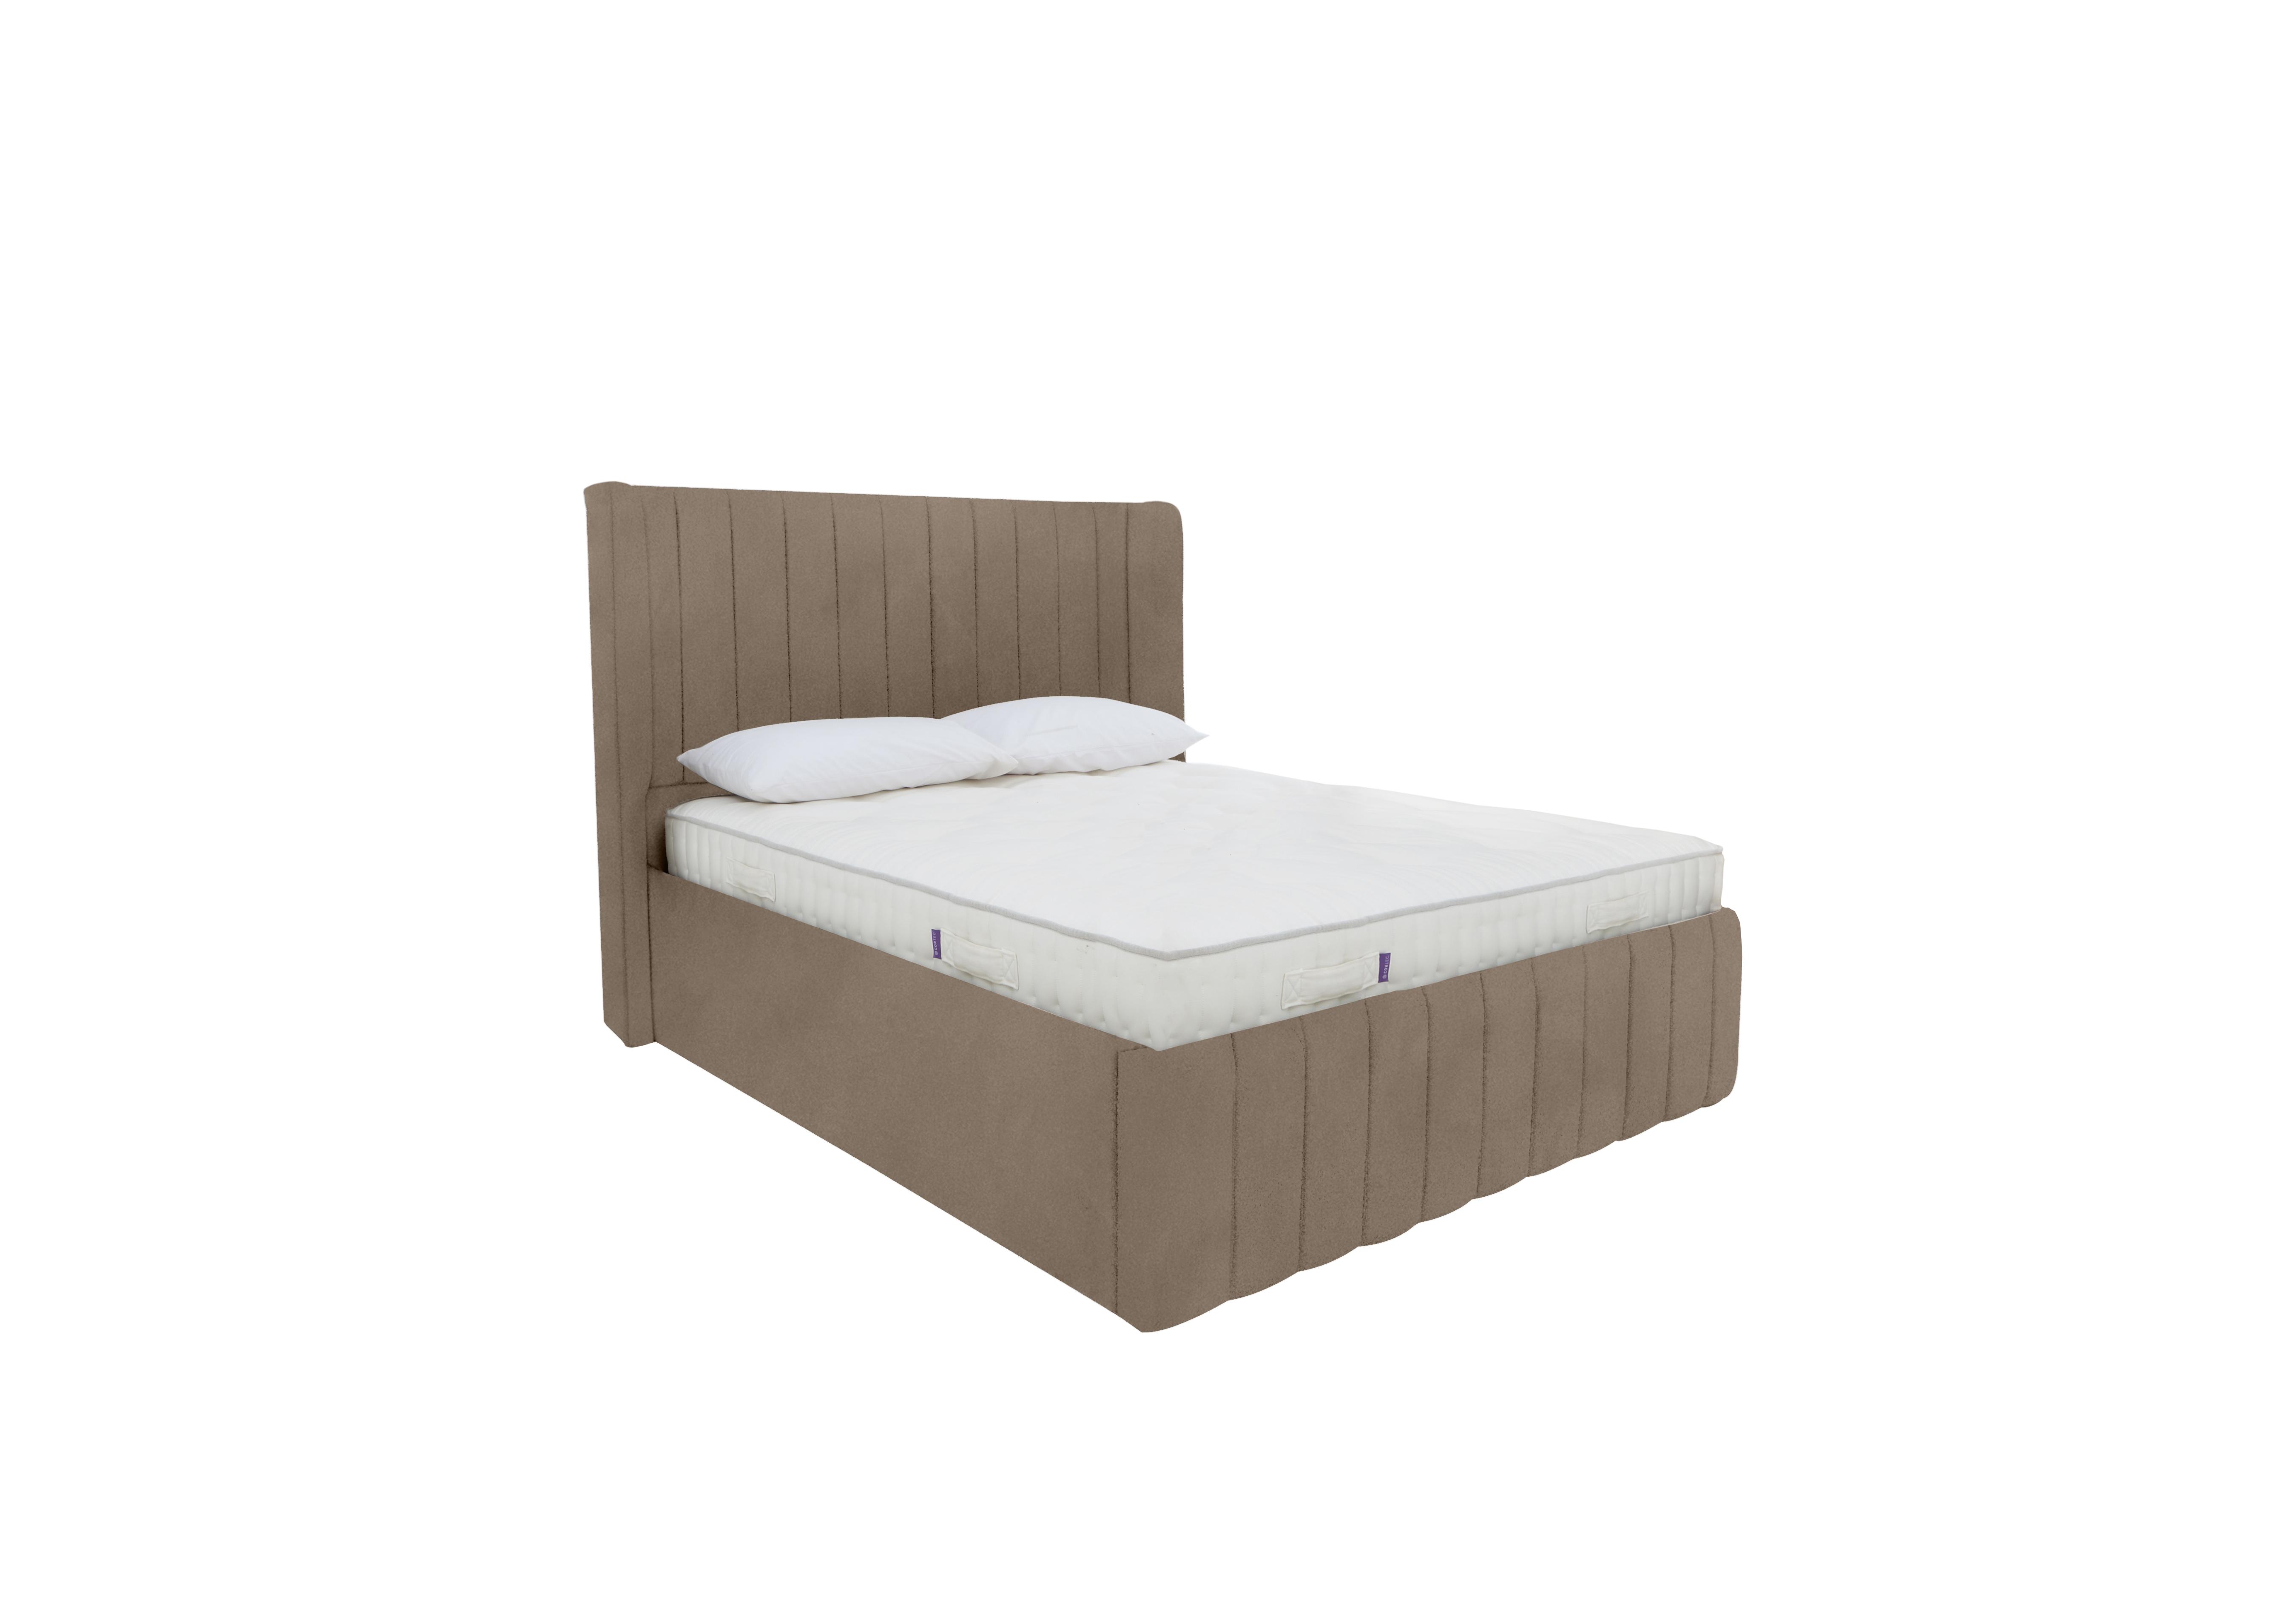 Eira Low Foot End Ottoman Bed Frame in Sanderson Potters Clay on Furniture Village